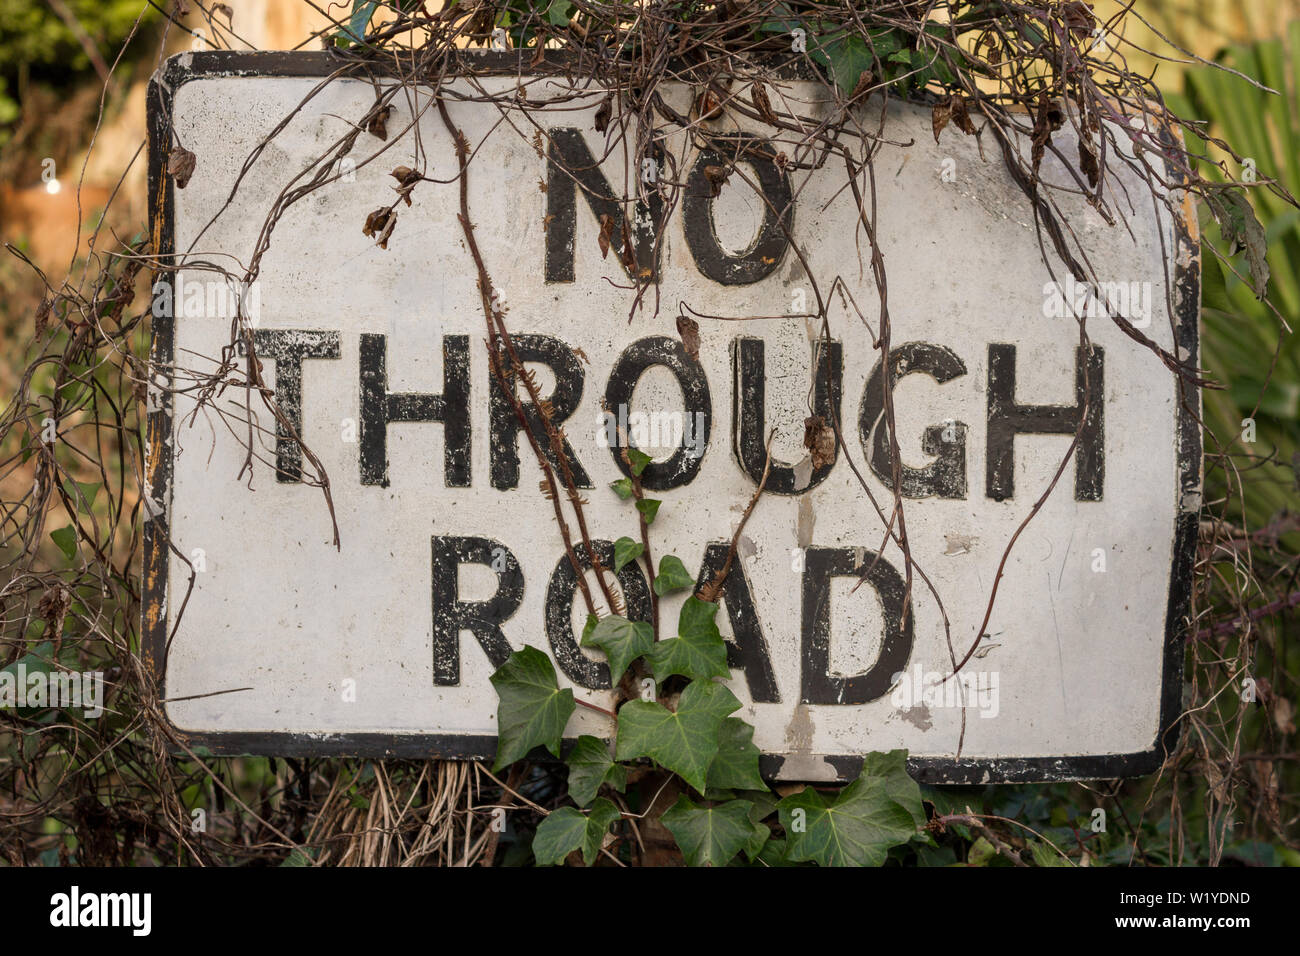 A "No Through Road" sign on a post partially hidden partially hidden by ivy and other overgrowth Stock Photo